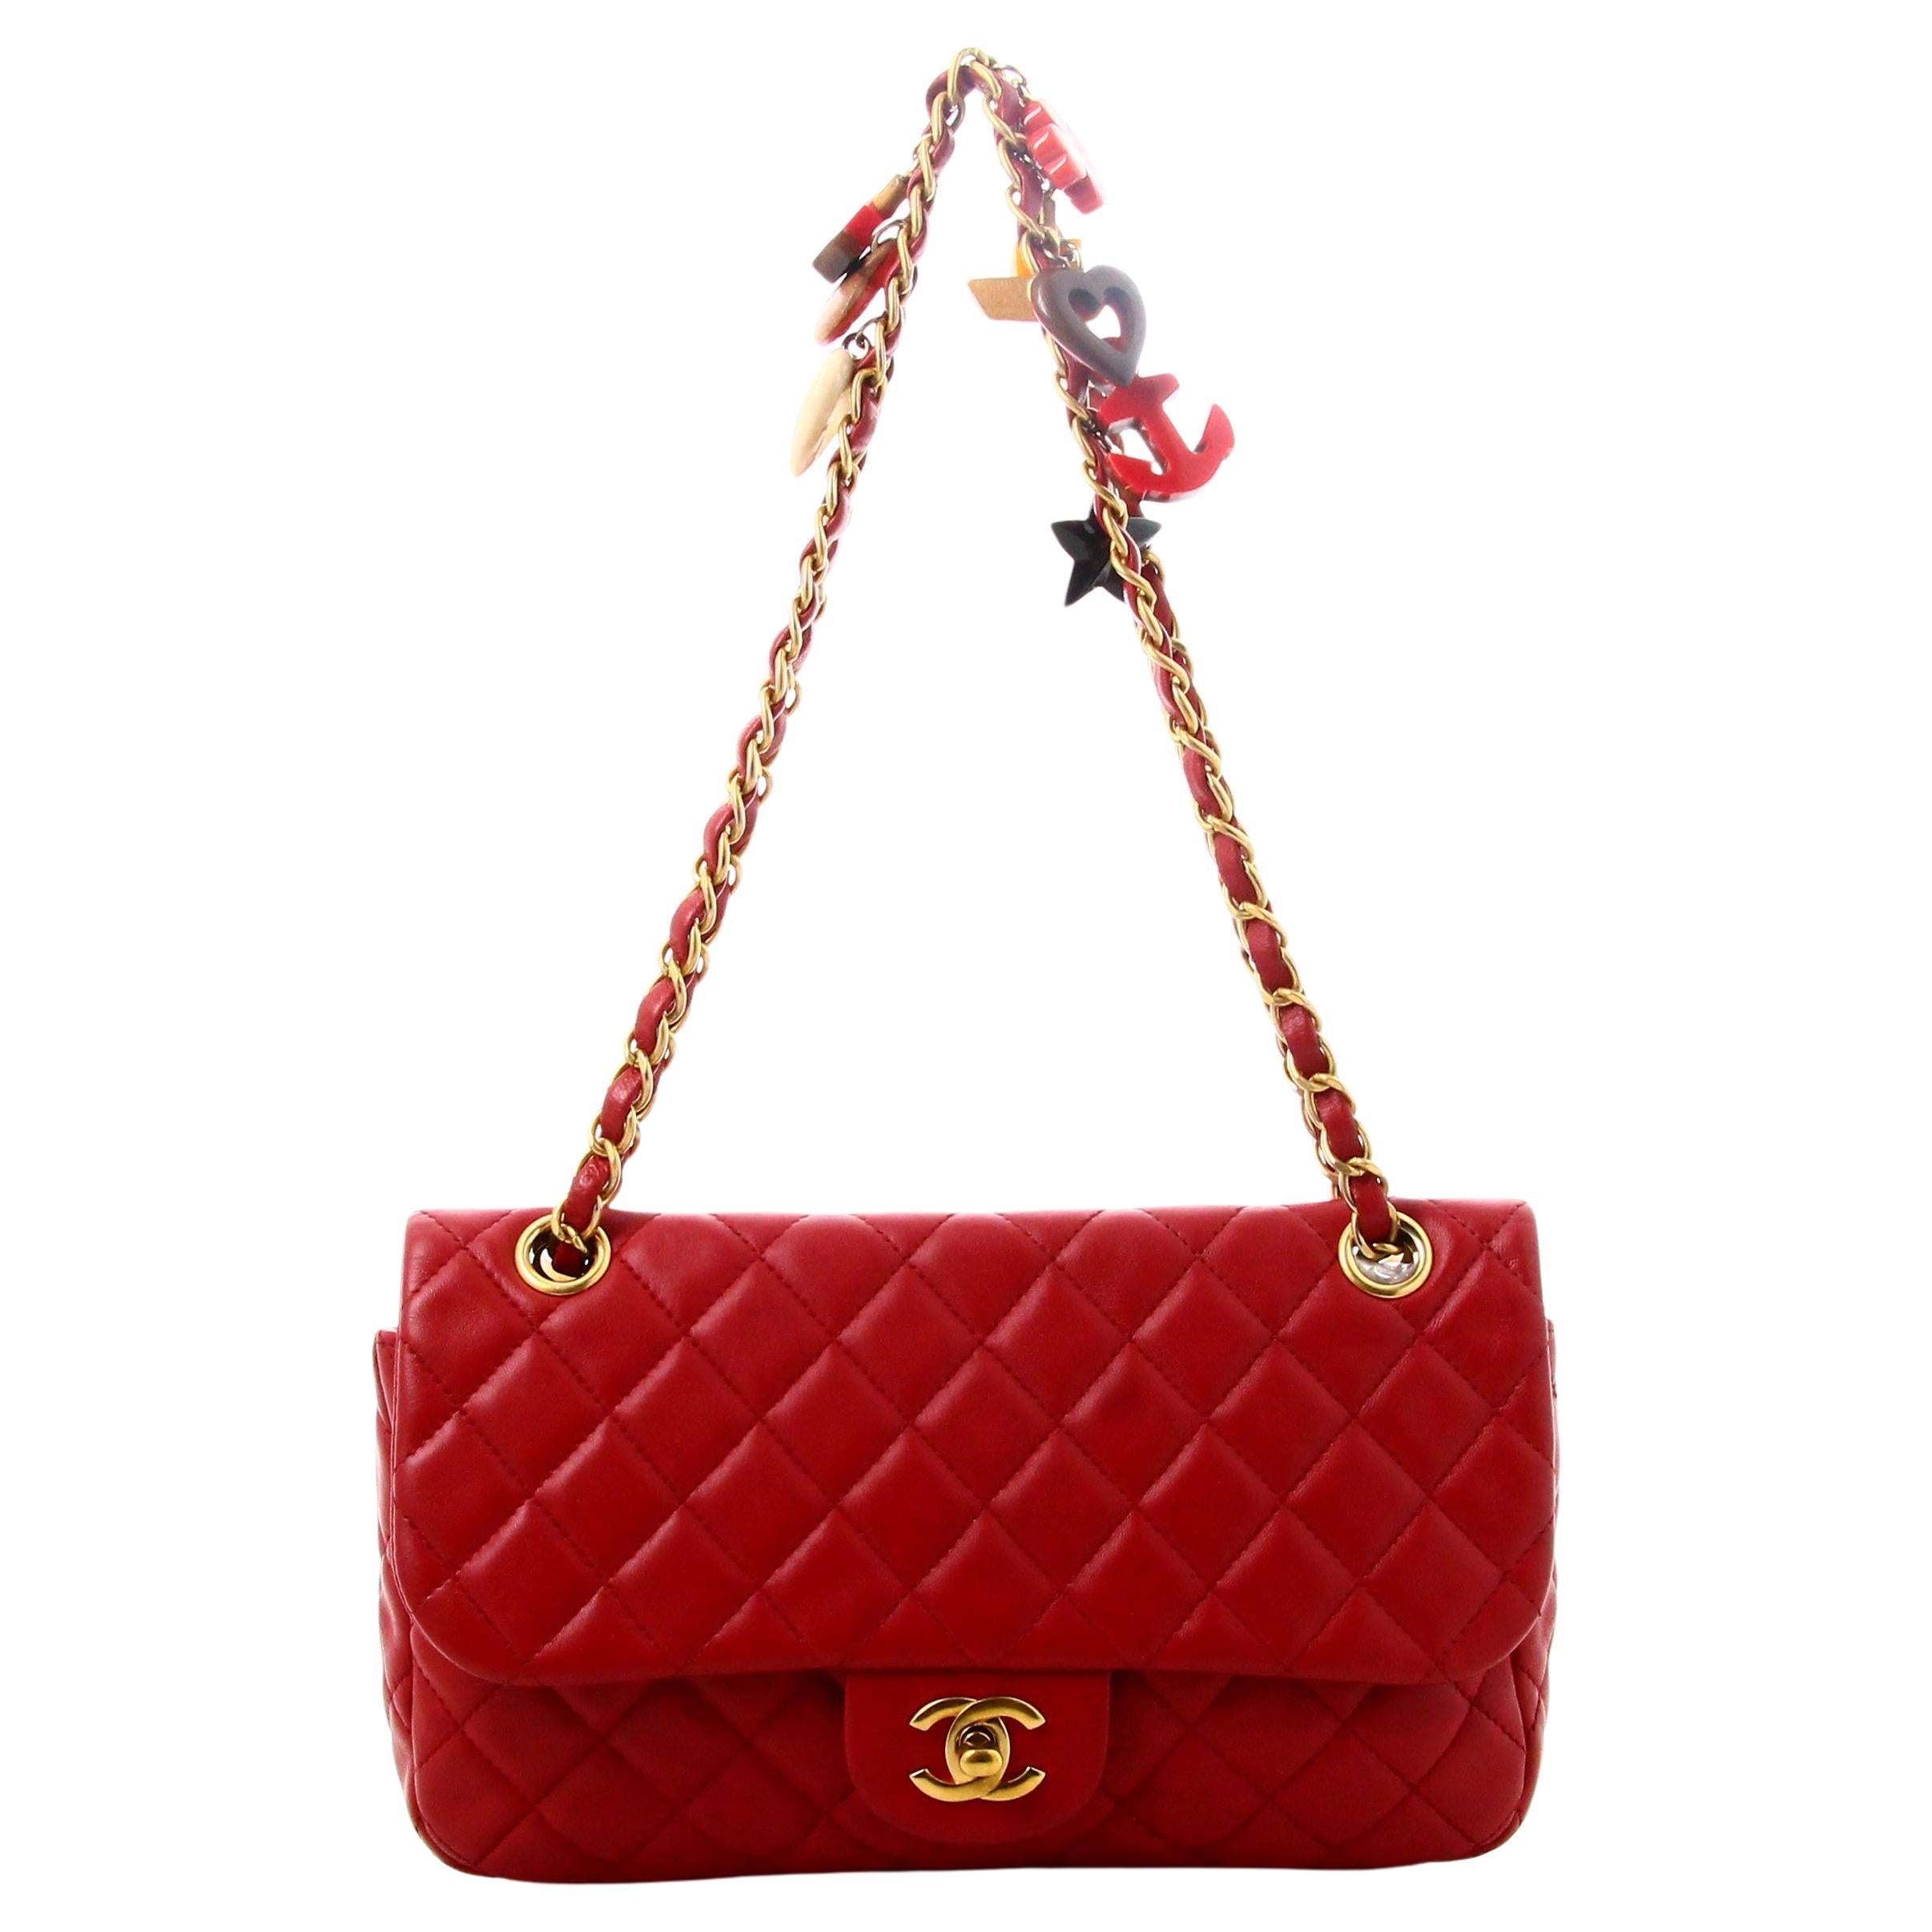 2010 Chanel Timeless Handbag Red Quilted Leather For Sale